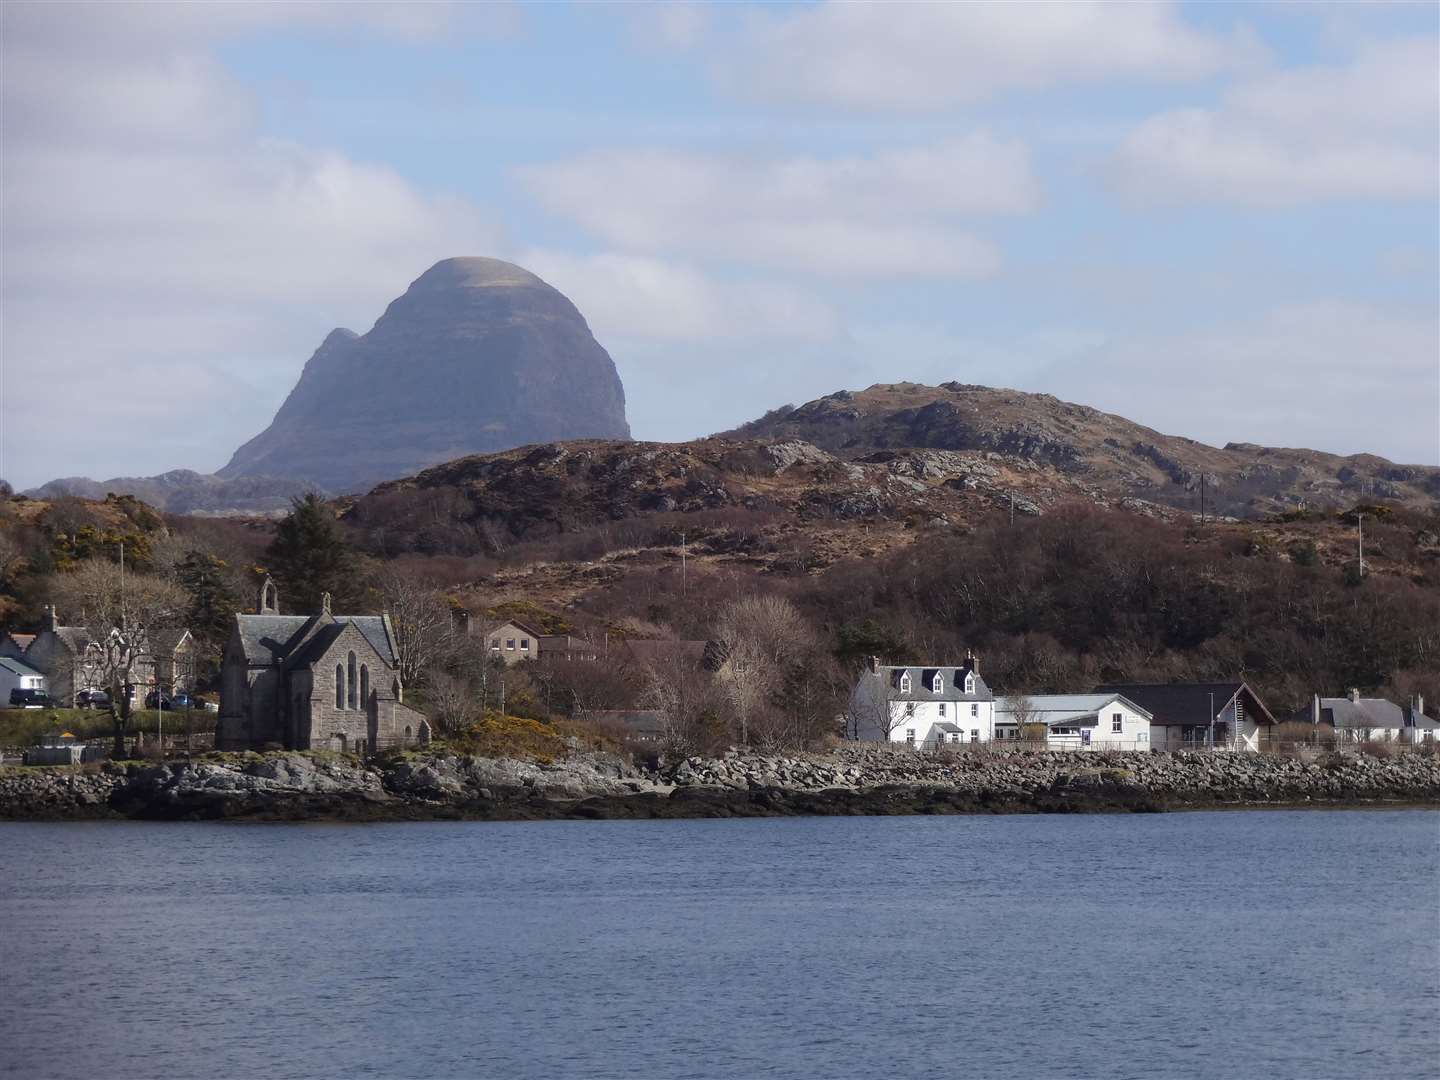 The view of Assynt and Stoer church from across the water. Photo: Andrew McClelland